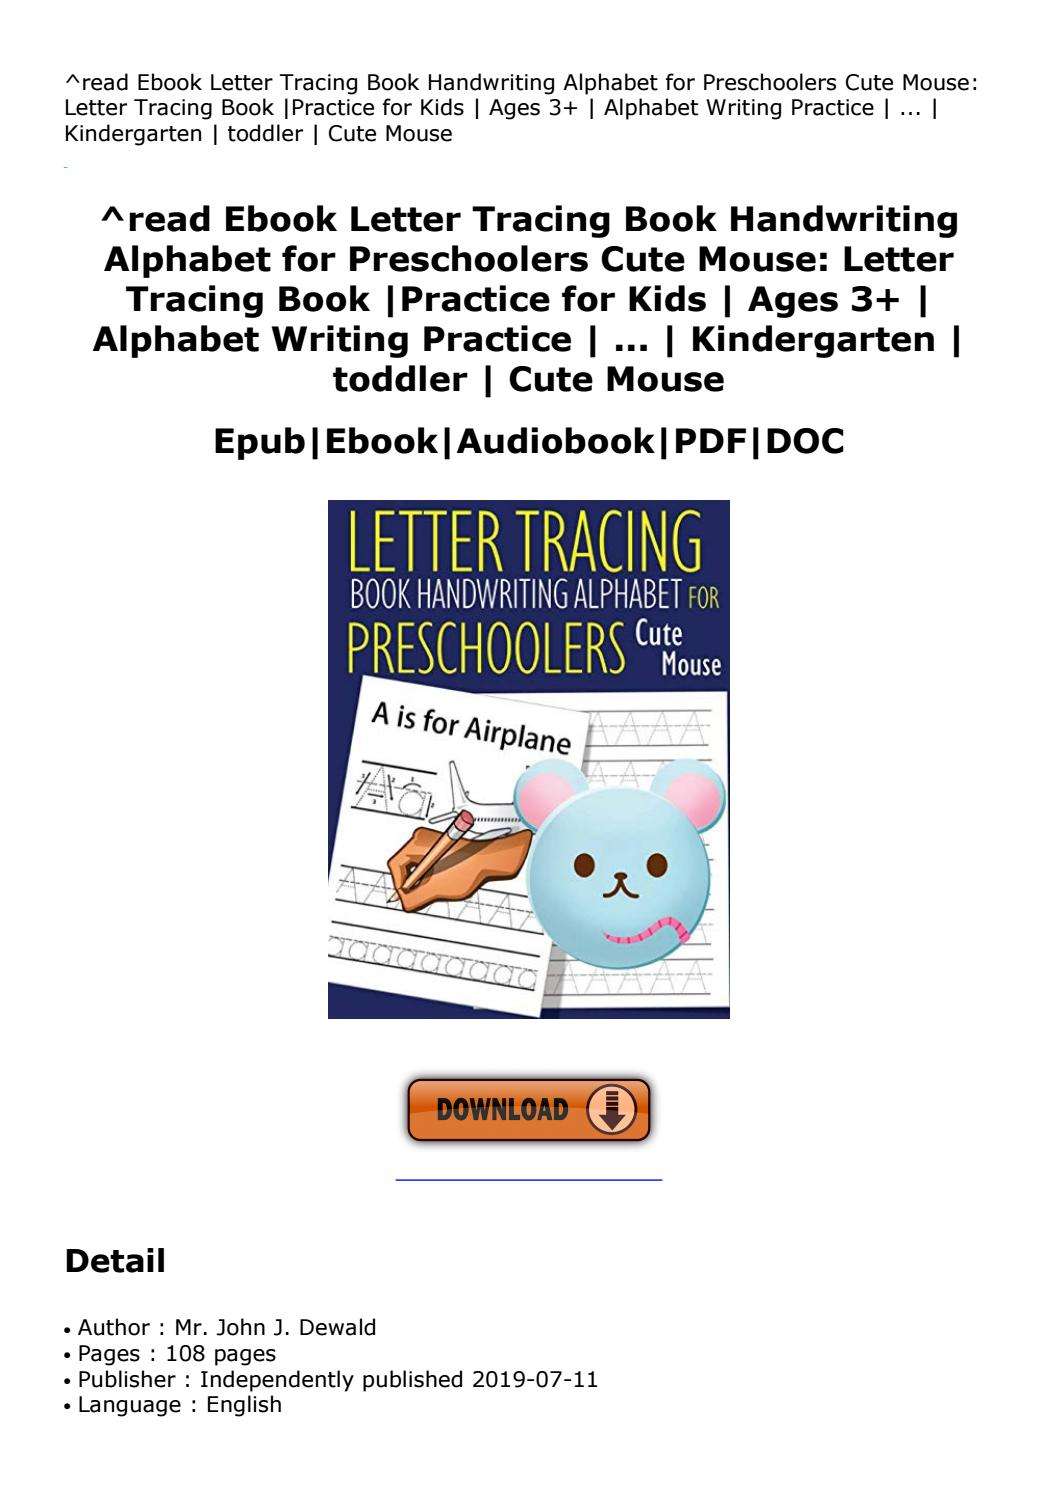 Read Ebook Letter Tracing Book Handwriting Alphabet For